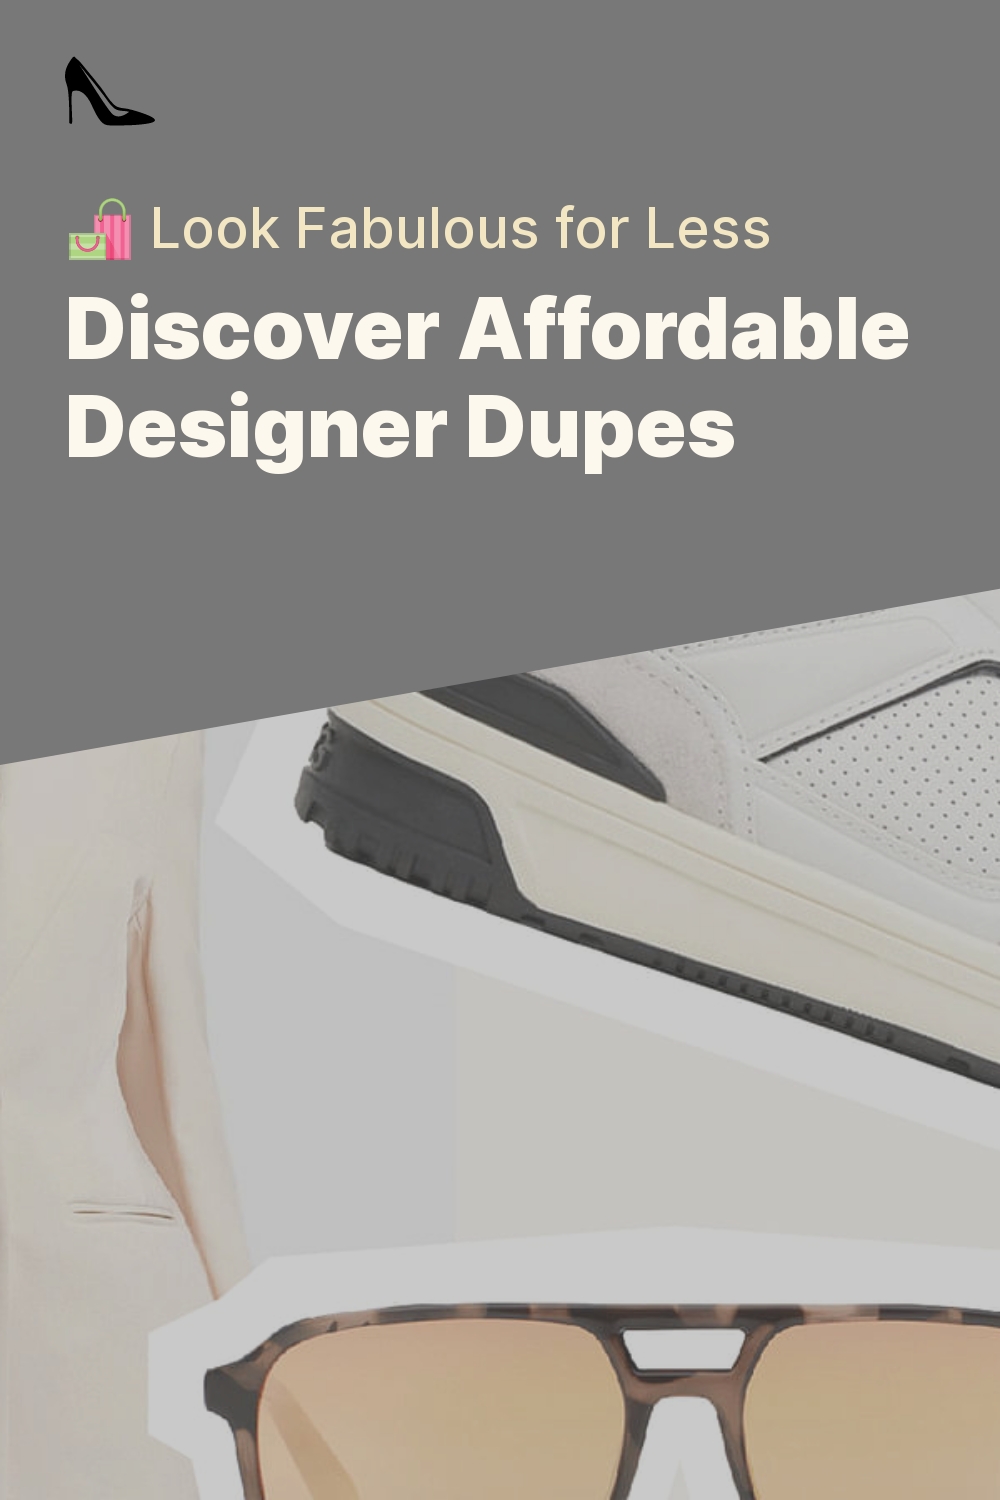 Discover Affordable Designer Dupes - 🛍️ Look Fabulous for Less